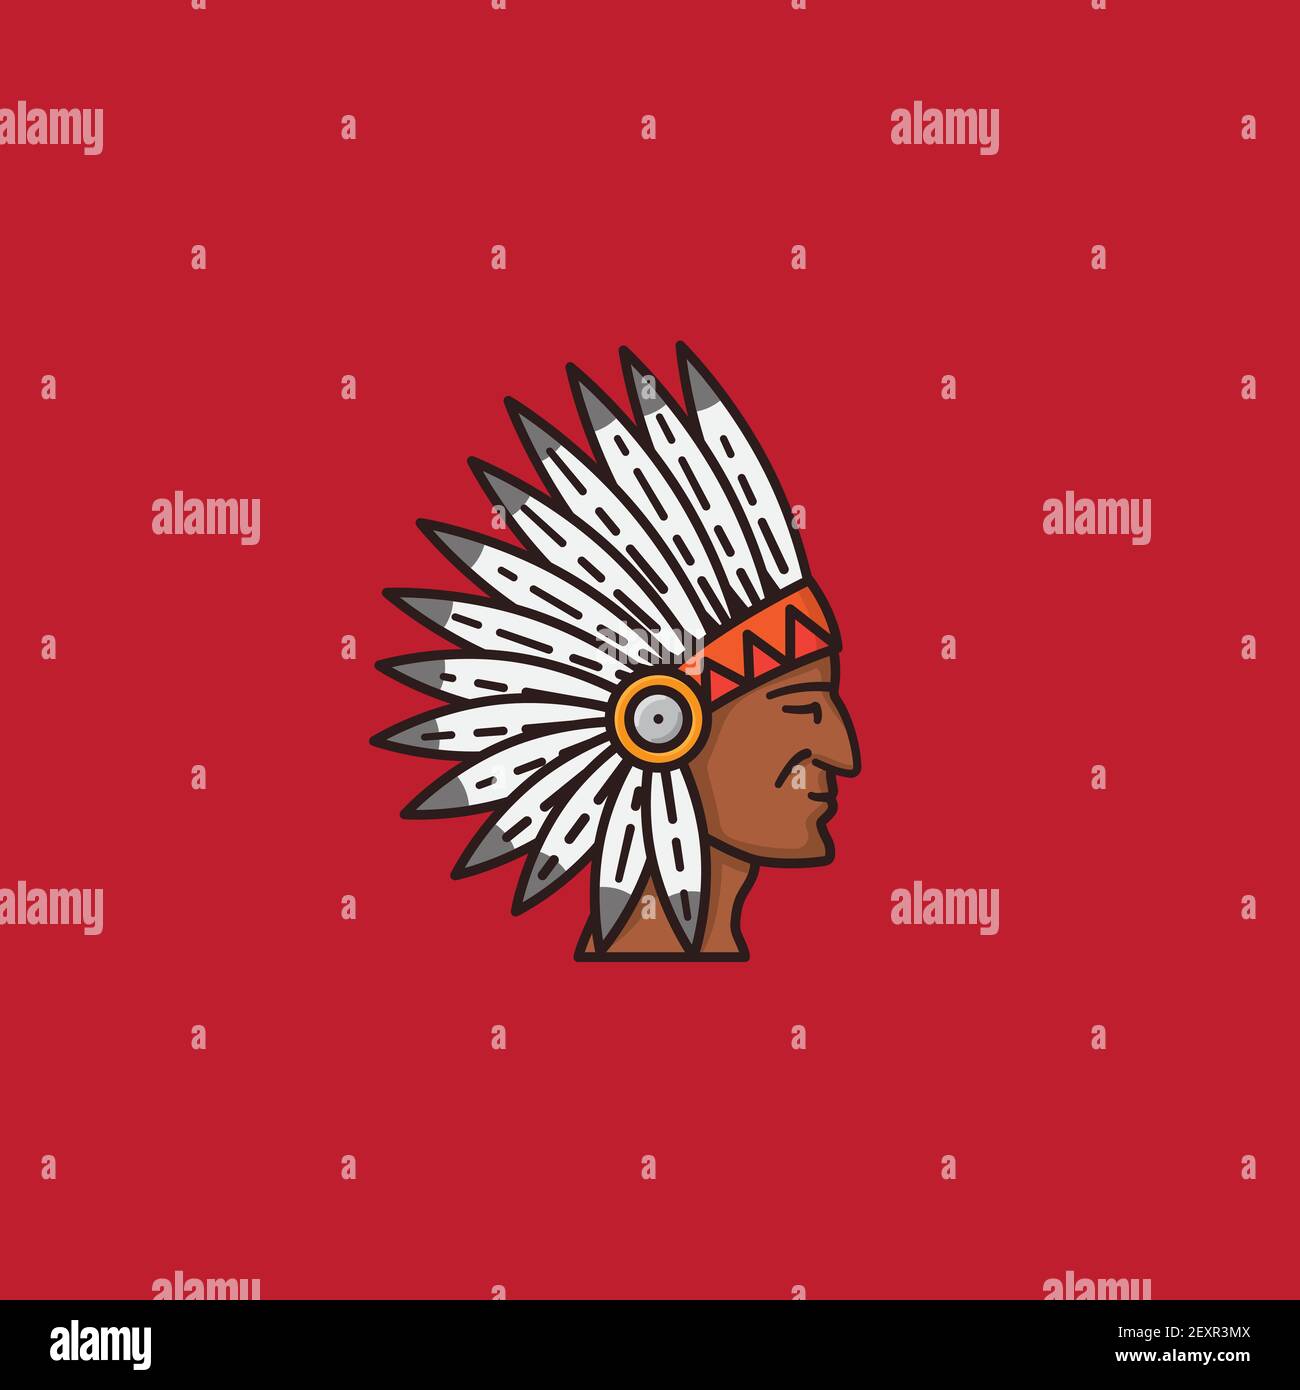 Native american indian head with traditional headdress vector illustration for Native American Day on October 12 Stock Vector